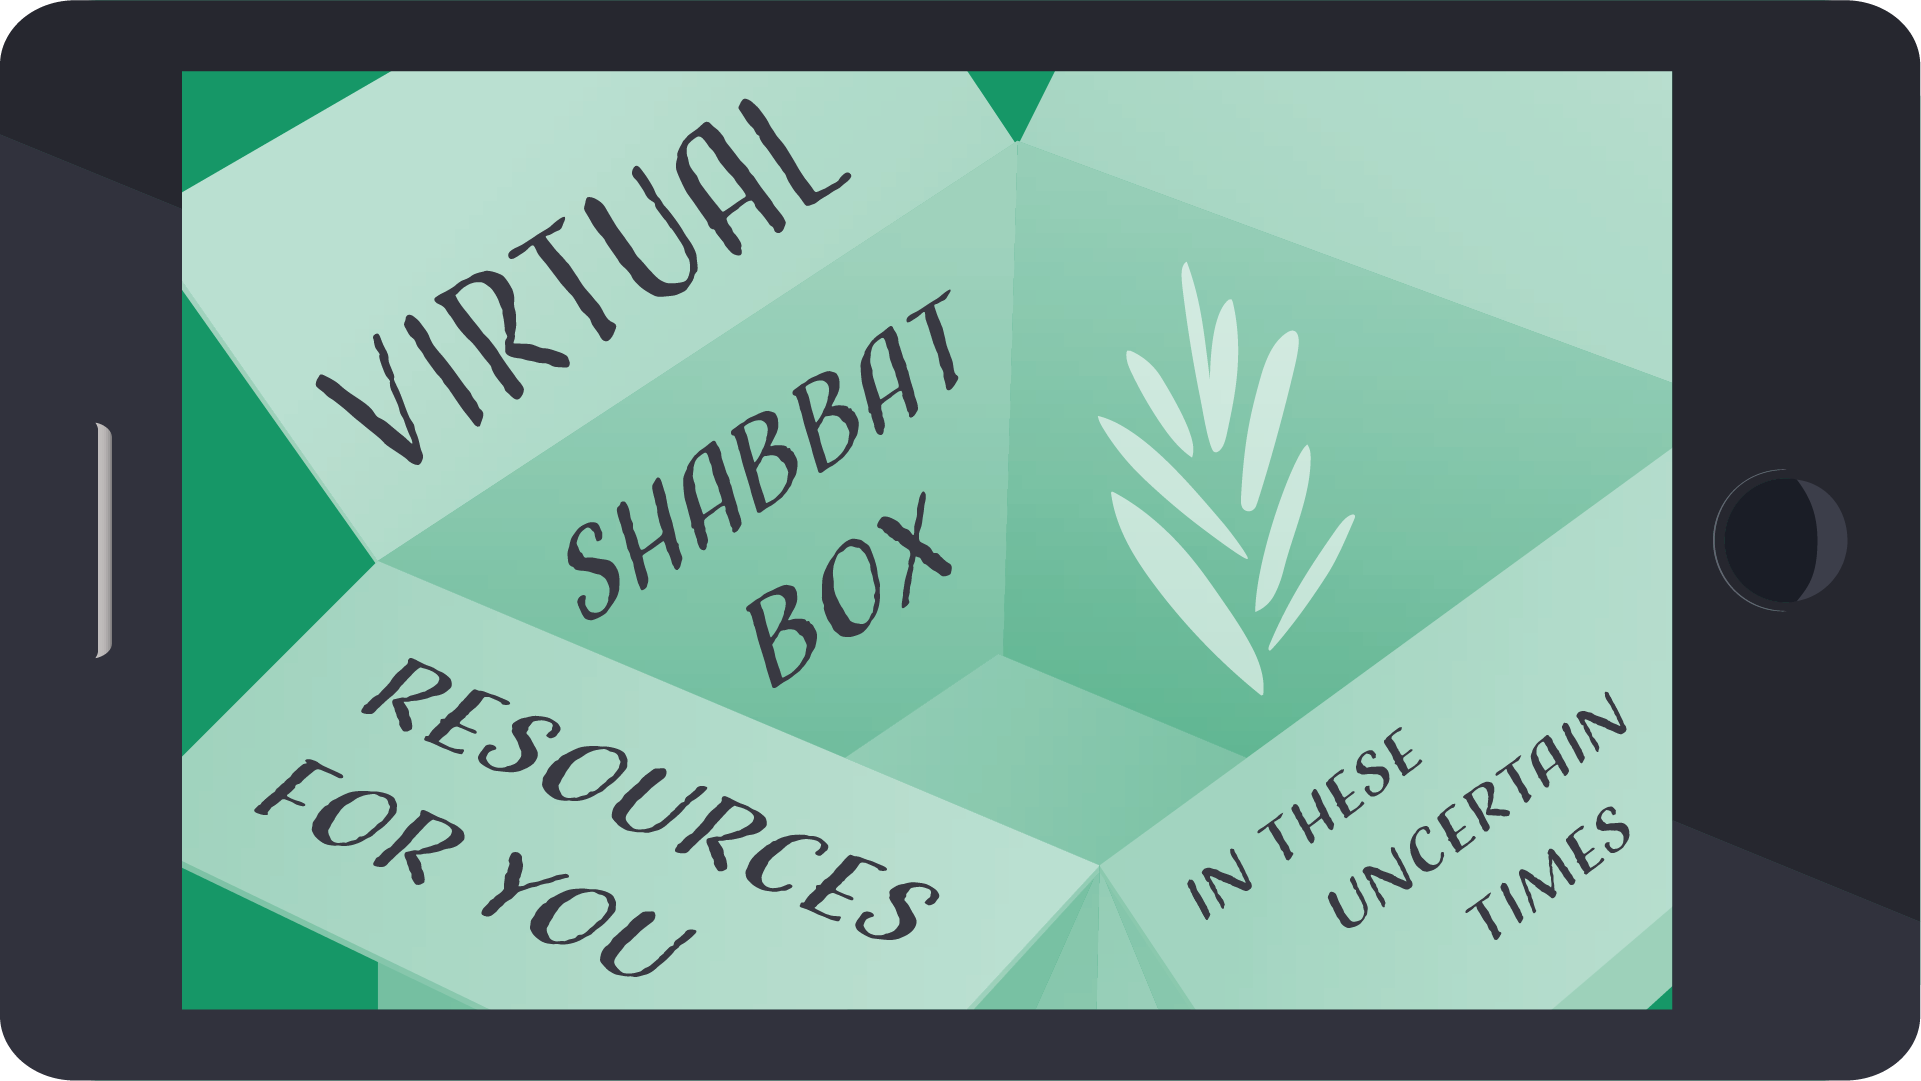 Virtual Shabbat Box - Resources for you in these uncertain times